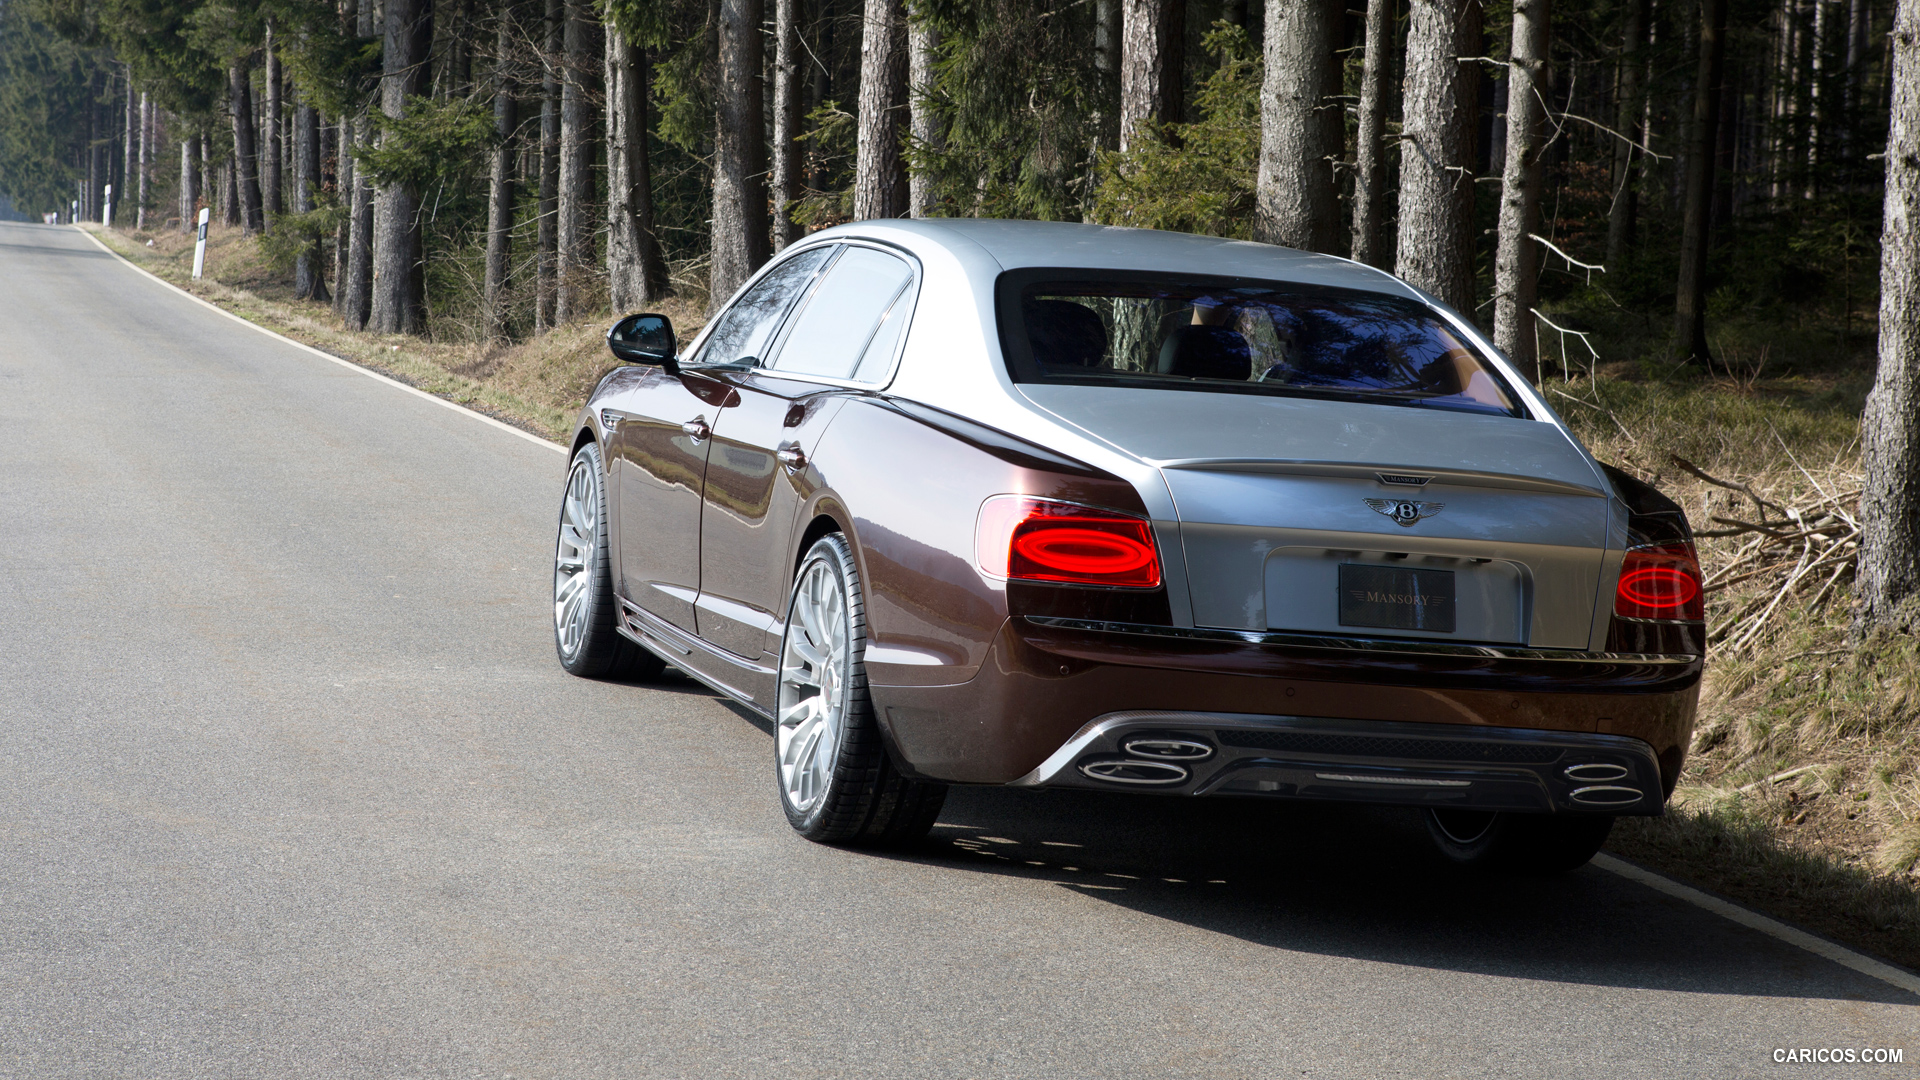 2014 Mansory Bentley Flying Spur  - Rear, #4 of 8